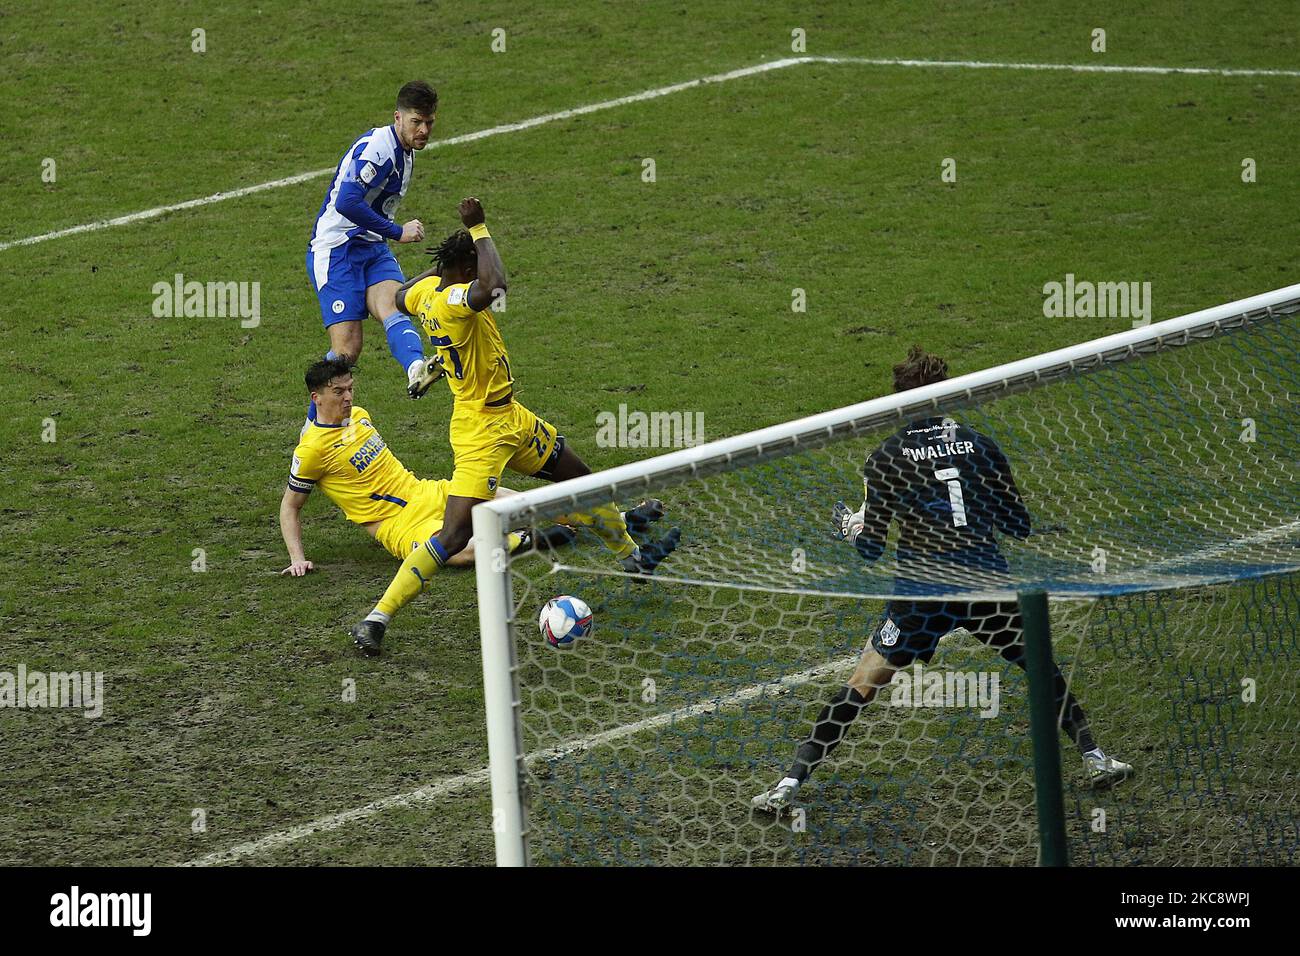 Wigans Jamie Proctor shoots and scores to make it 2-2 during the Sky Bet League 1 match between Wigan Athletic and AFC Wimbledon at the DW Stadium, Wigan on Saturday 6th February 2021. (Photo by Chris Donnelly/MI News/NurPhoto) Stock Photo